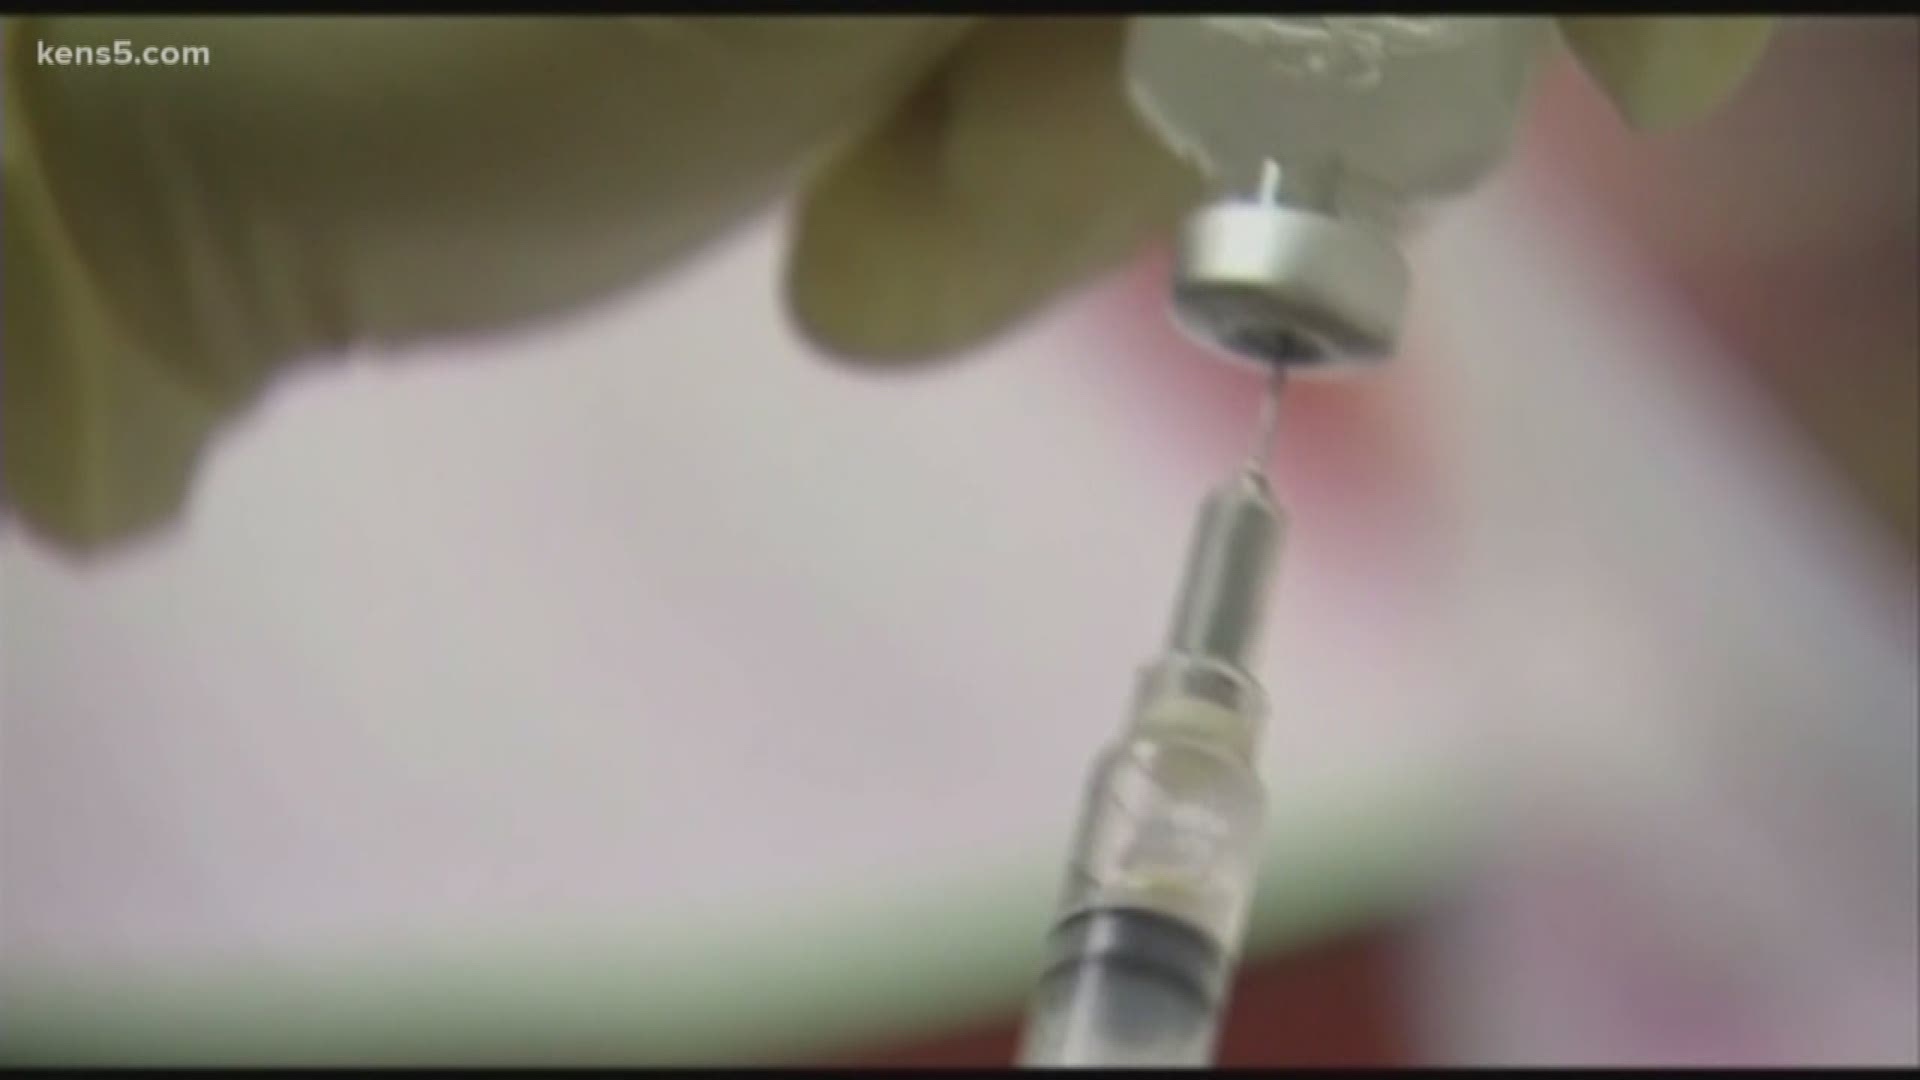 The Center for Disease Control advises that individuals should receive their flu shots by the end of October. But is August too soon?